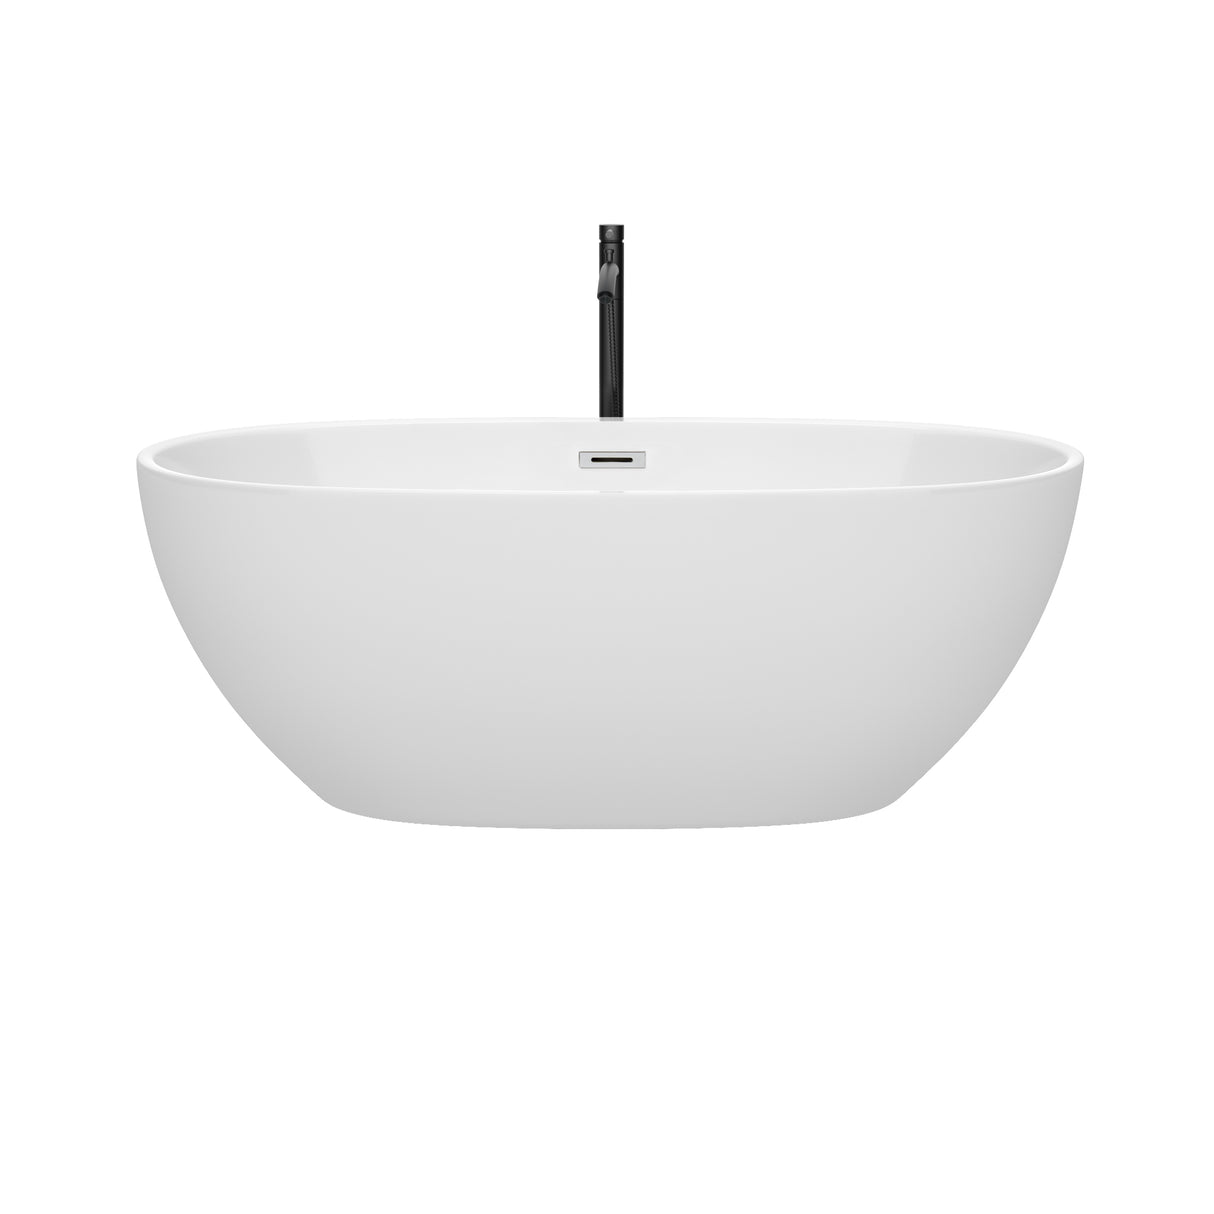 Juno 63 Inch Freestanding Bathtub in White with Polished Chrome Trim and Floor Mounted Faucet in Matte Black